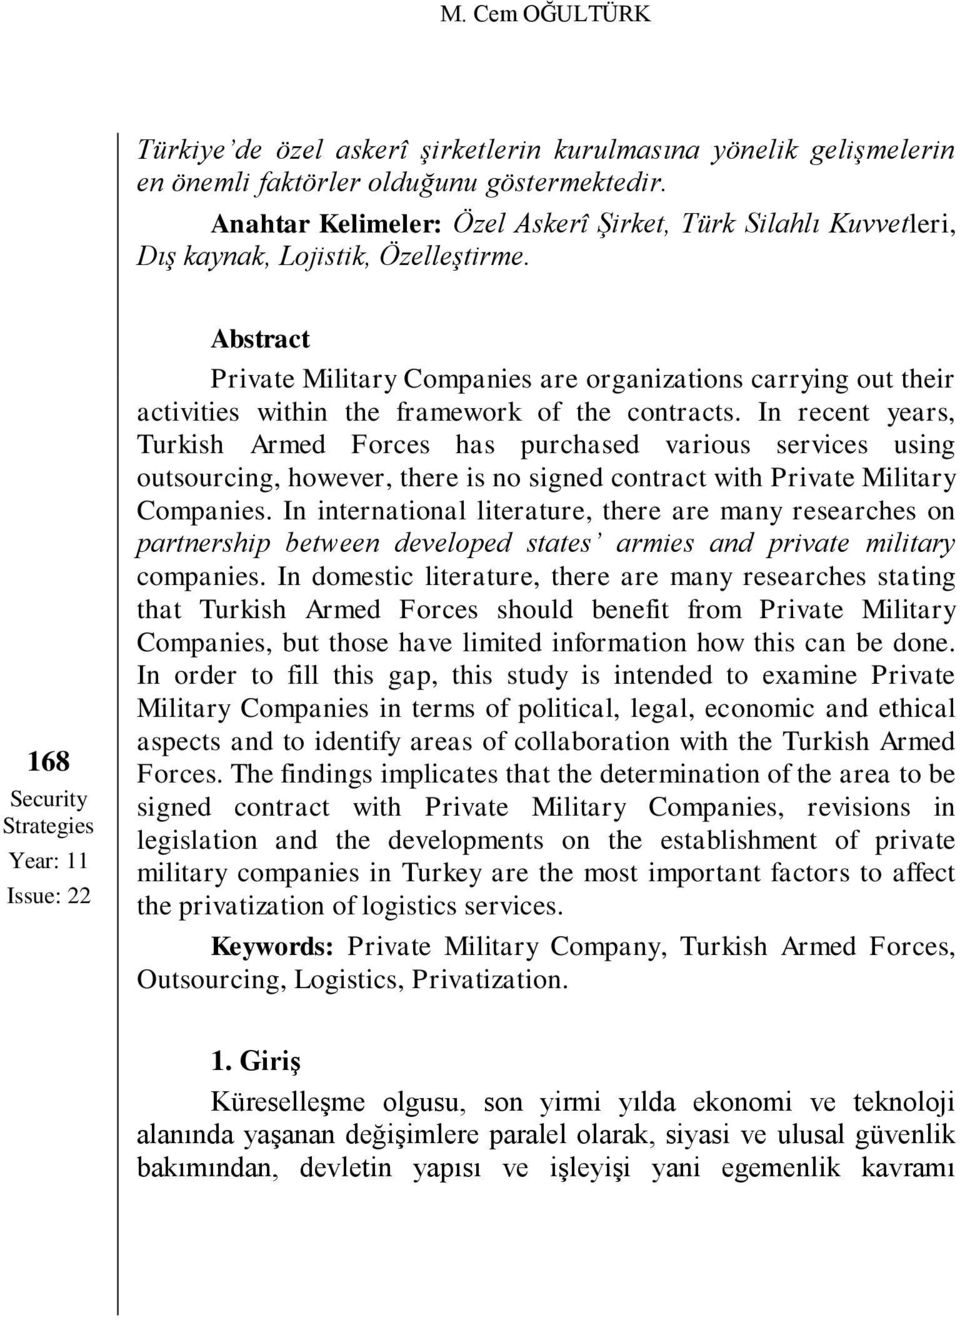 168 Security Strategies Year: 11 Issue: 22 Abstract Private Military Companies are organizations carrying out their activities within the framework of the contracts.